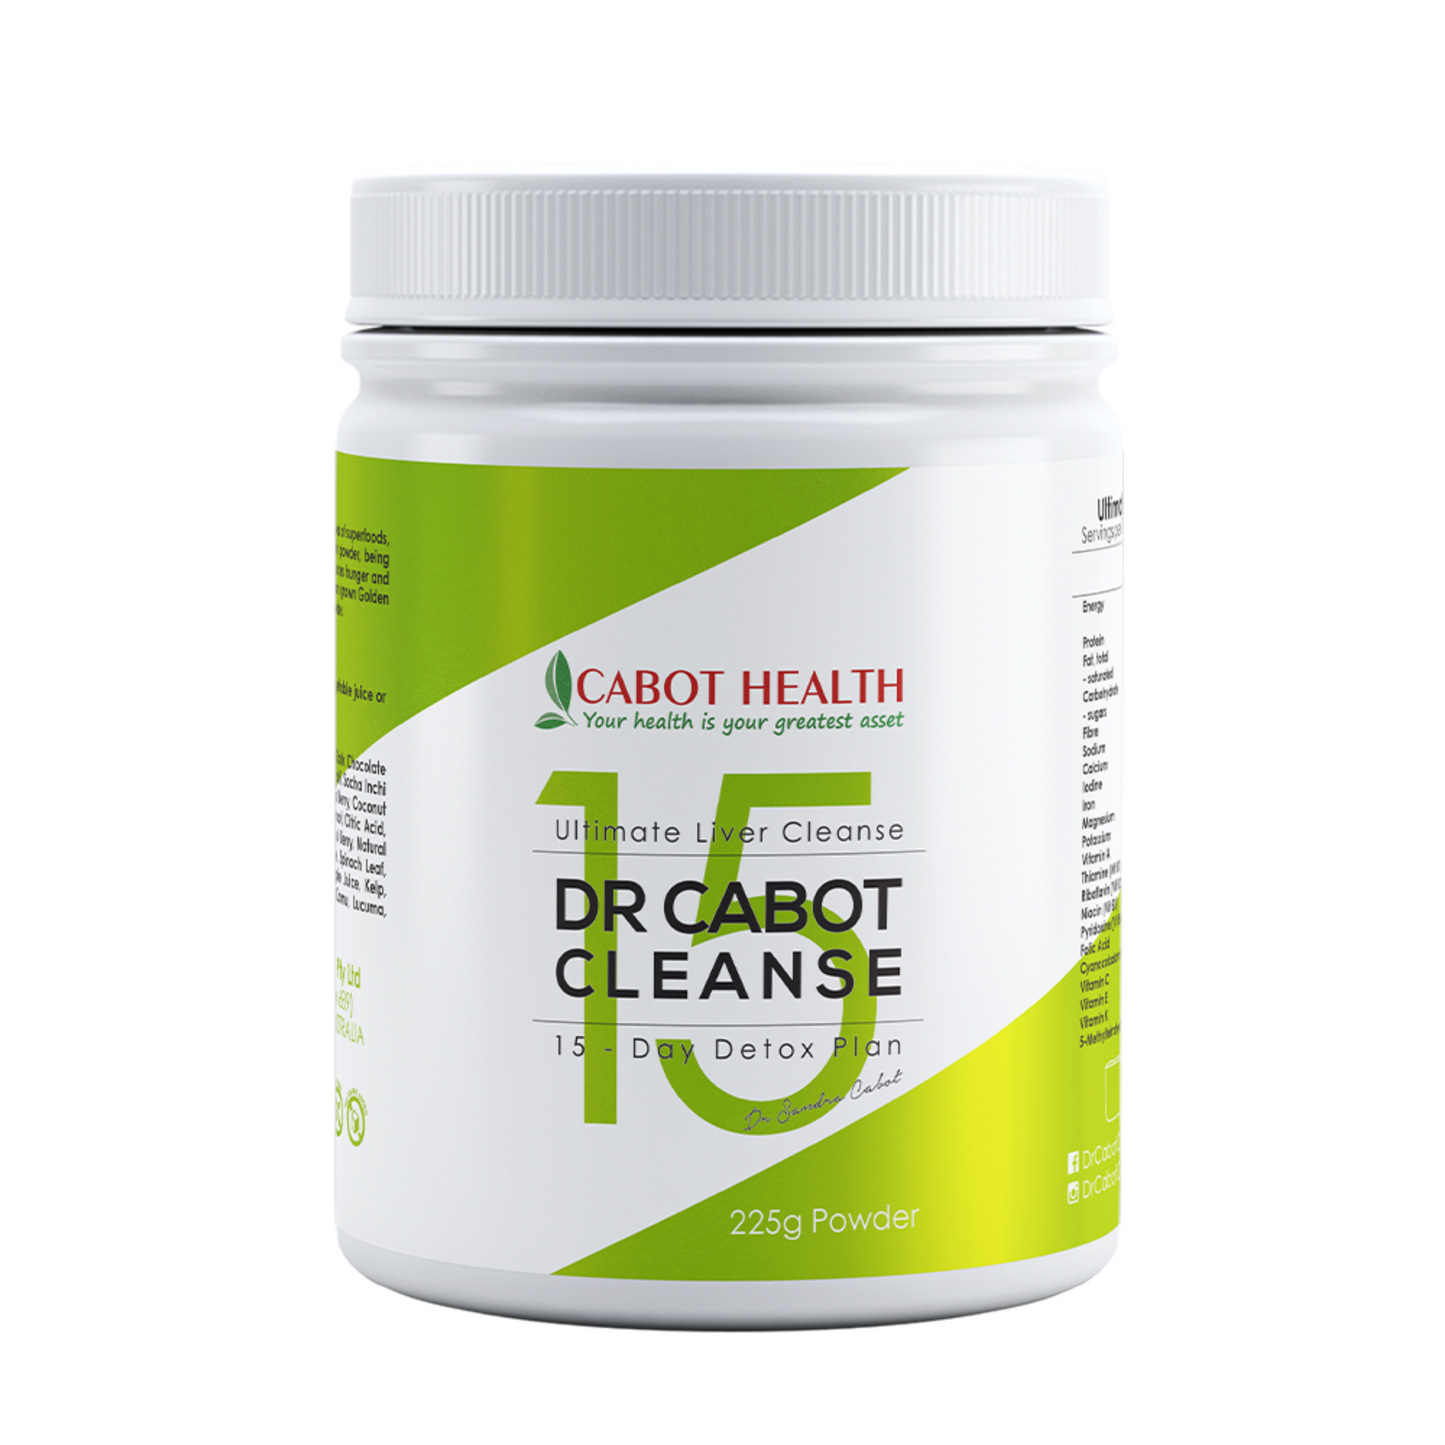 Dr. Cabot Cleanse Cabot Health Ultimate total body cleanse – 15 day detox plan